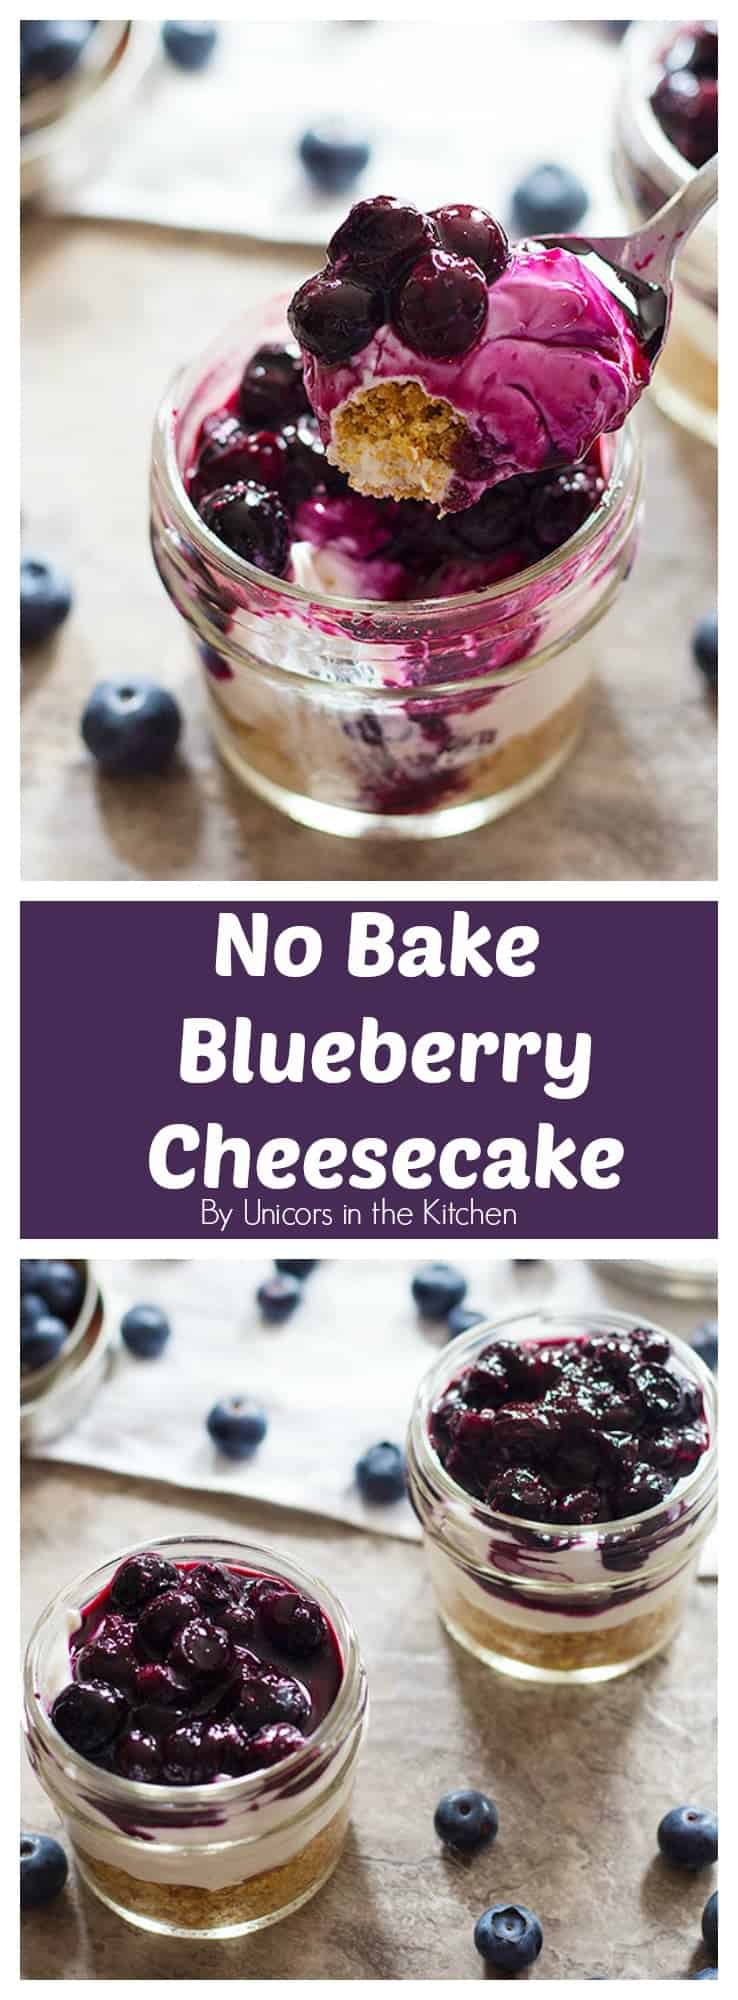 Whip up this indulgent No Bake Mini Blueberry Cheesecake in less than 30 minutes with very basic ingredients! It's creamy, velvety and will make you super happy! 